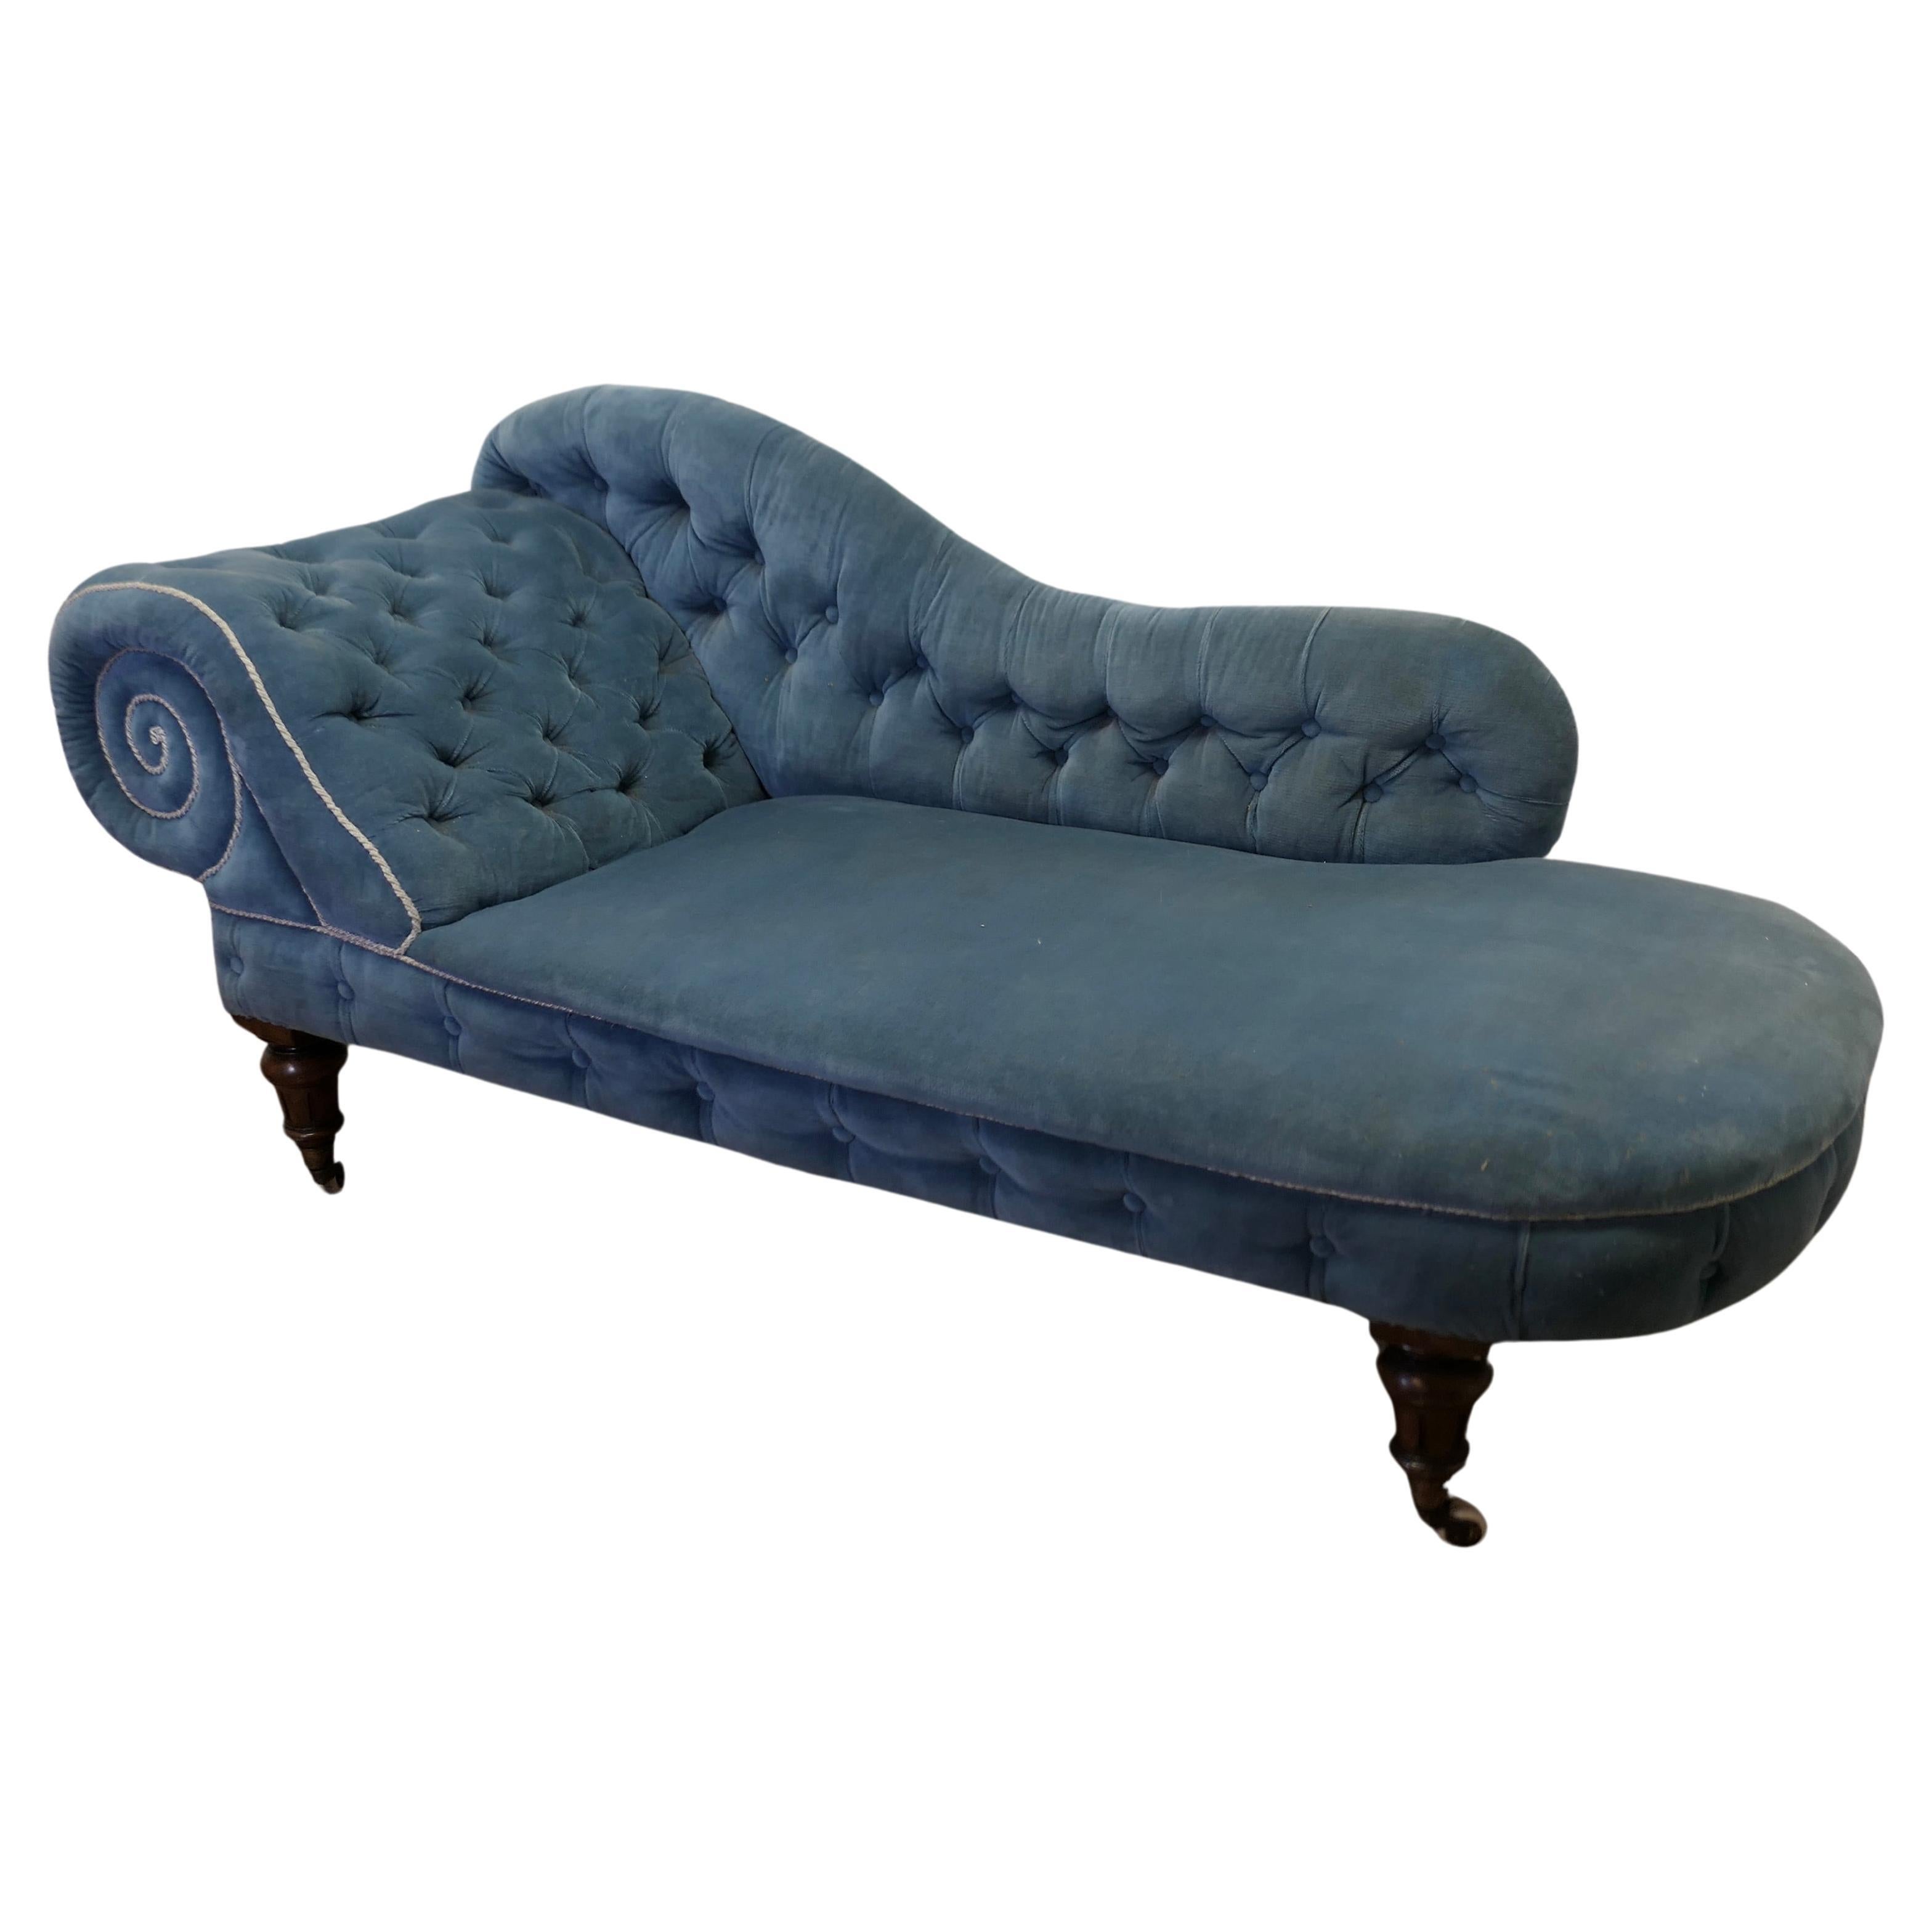 Very Stylish Victorian Velvet Chaise Longue or Day Bed    For Sale